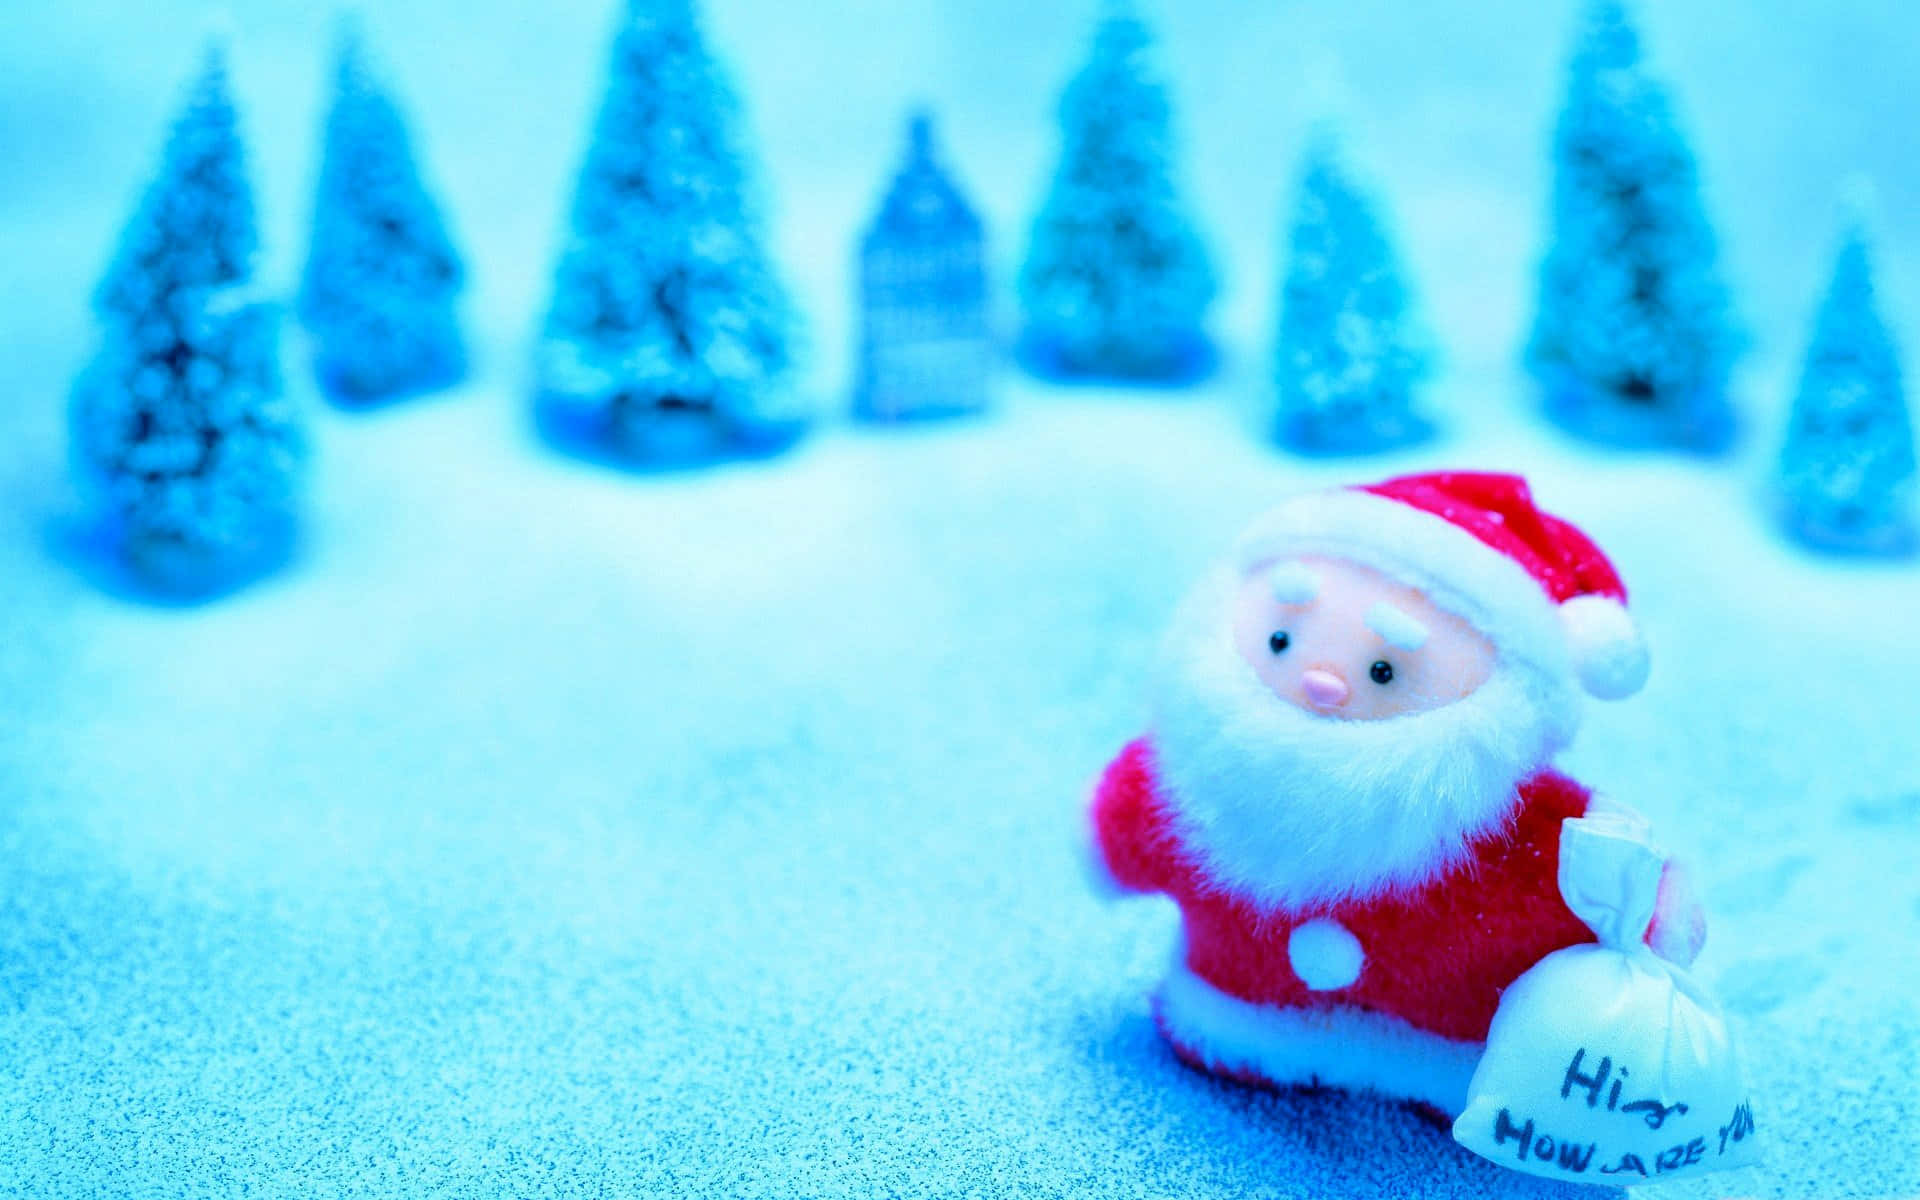 Santa Claus happily holding a bag full of gifts in a snowy setting.